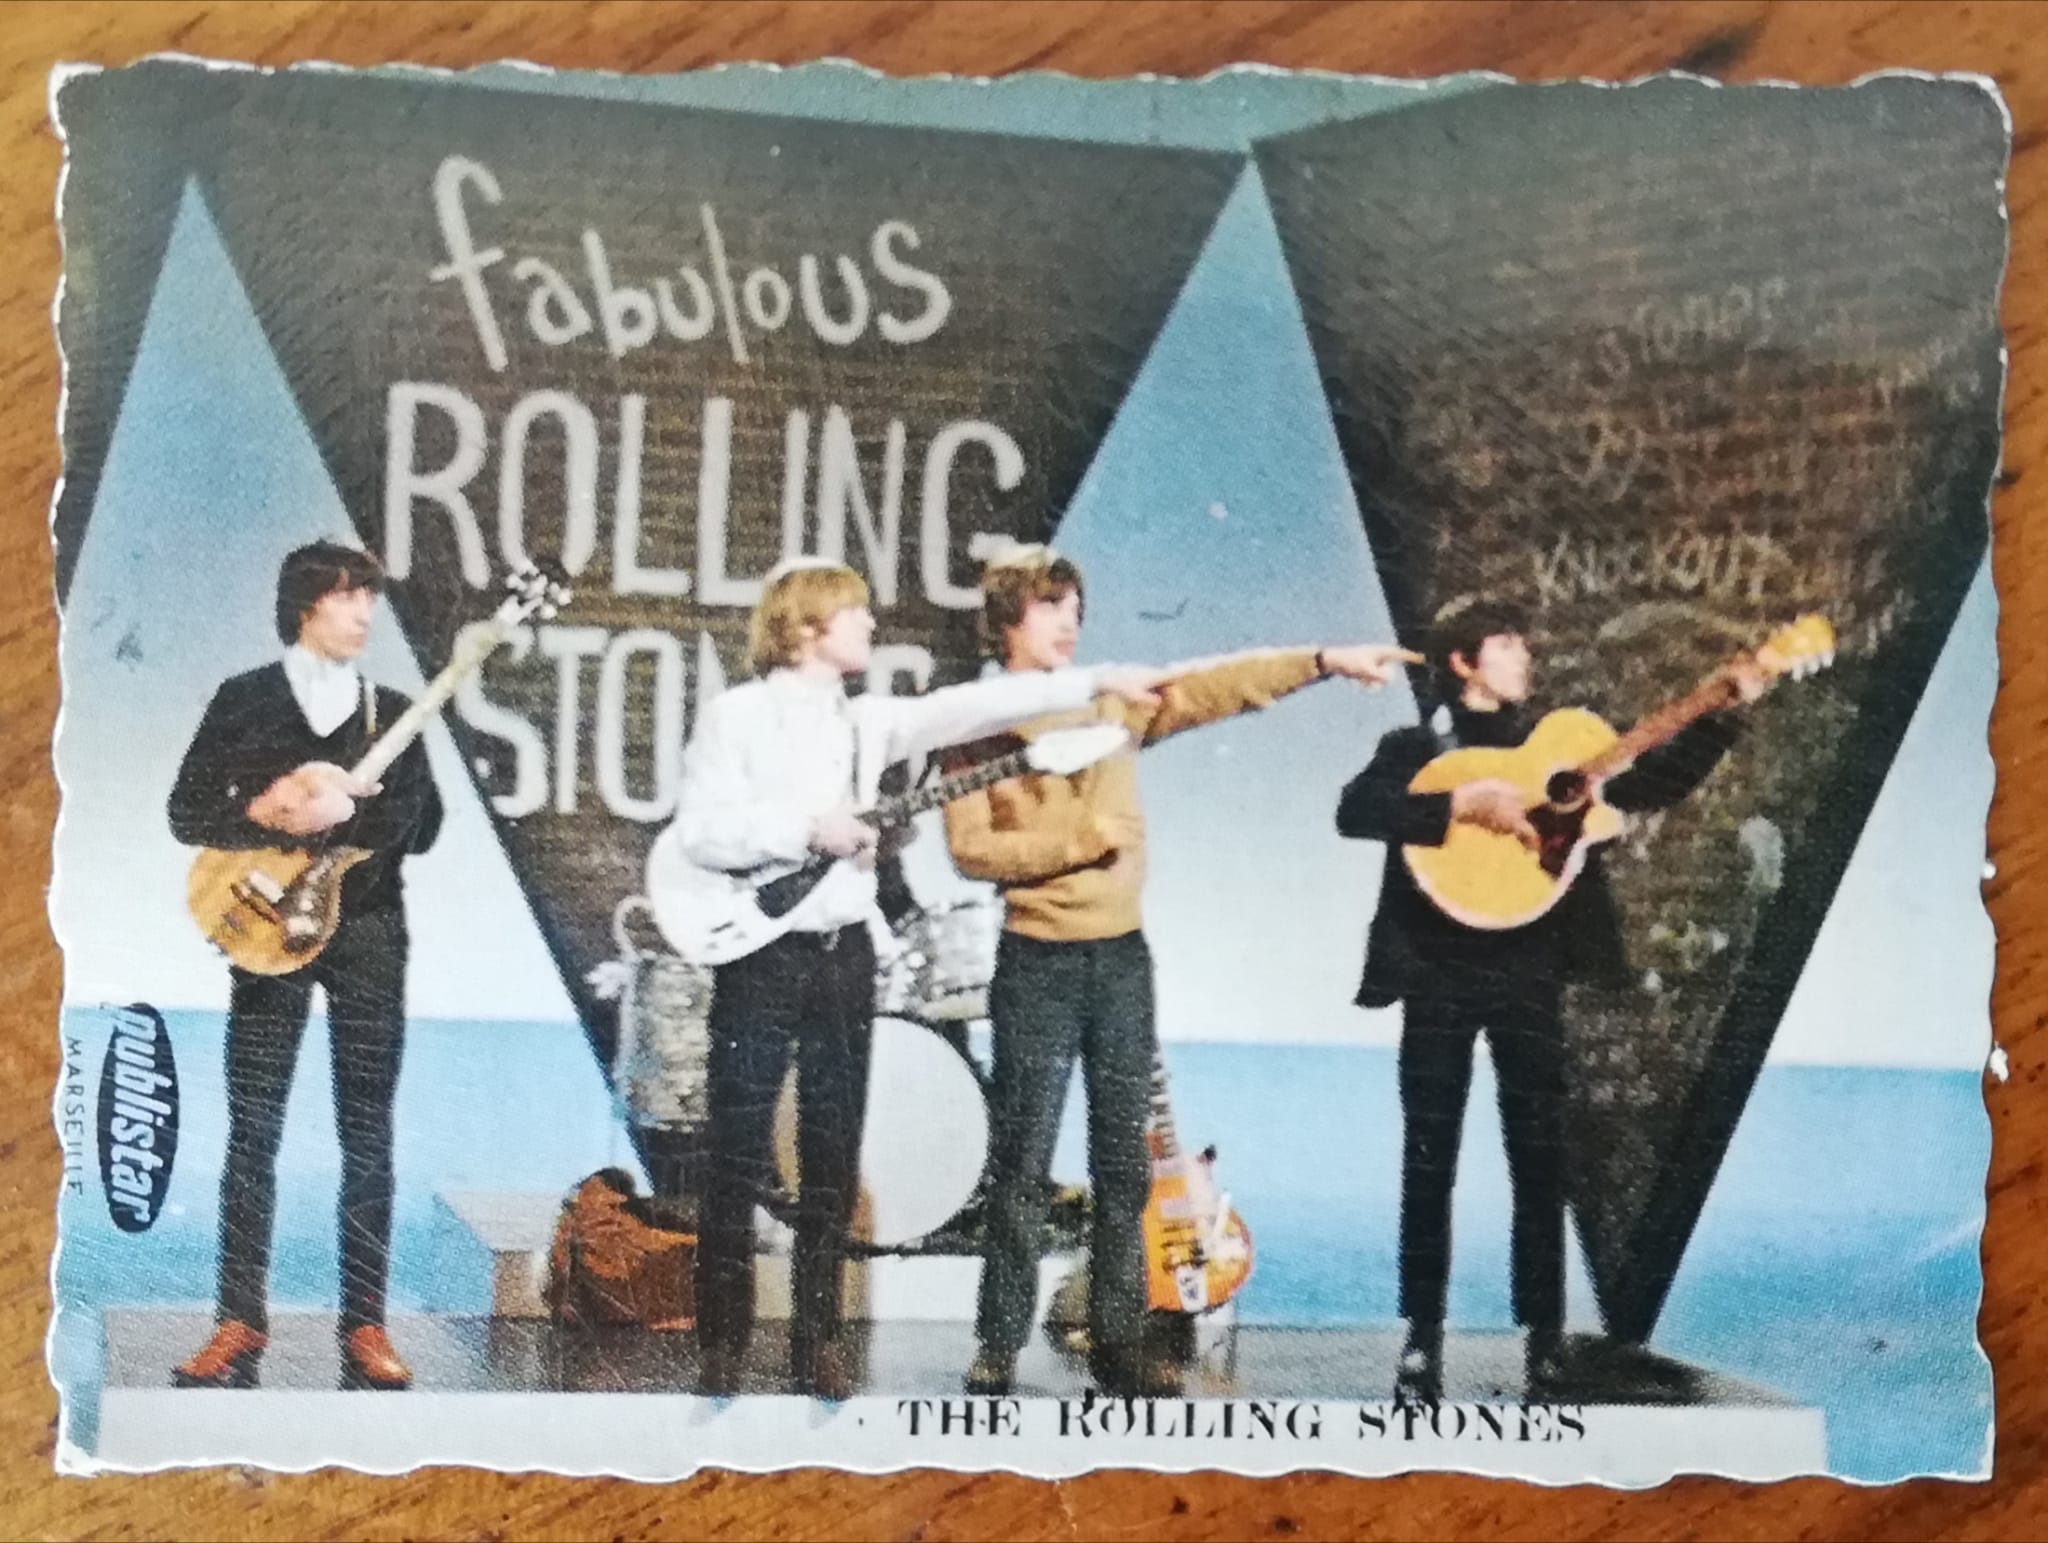 The Rolling Stones - 'The fabulous Rolling Stones' postcard  - Publistar  France card